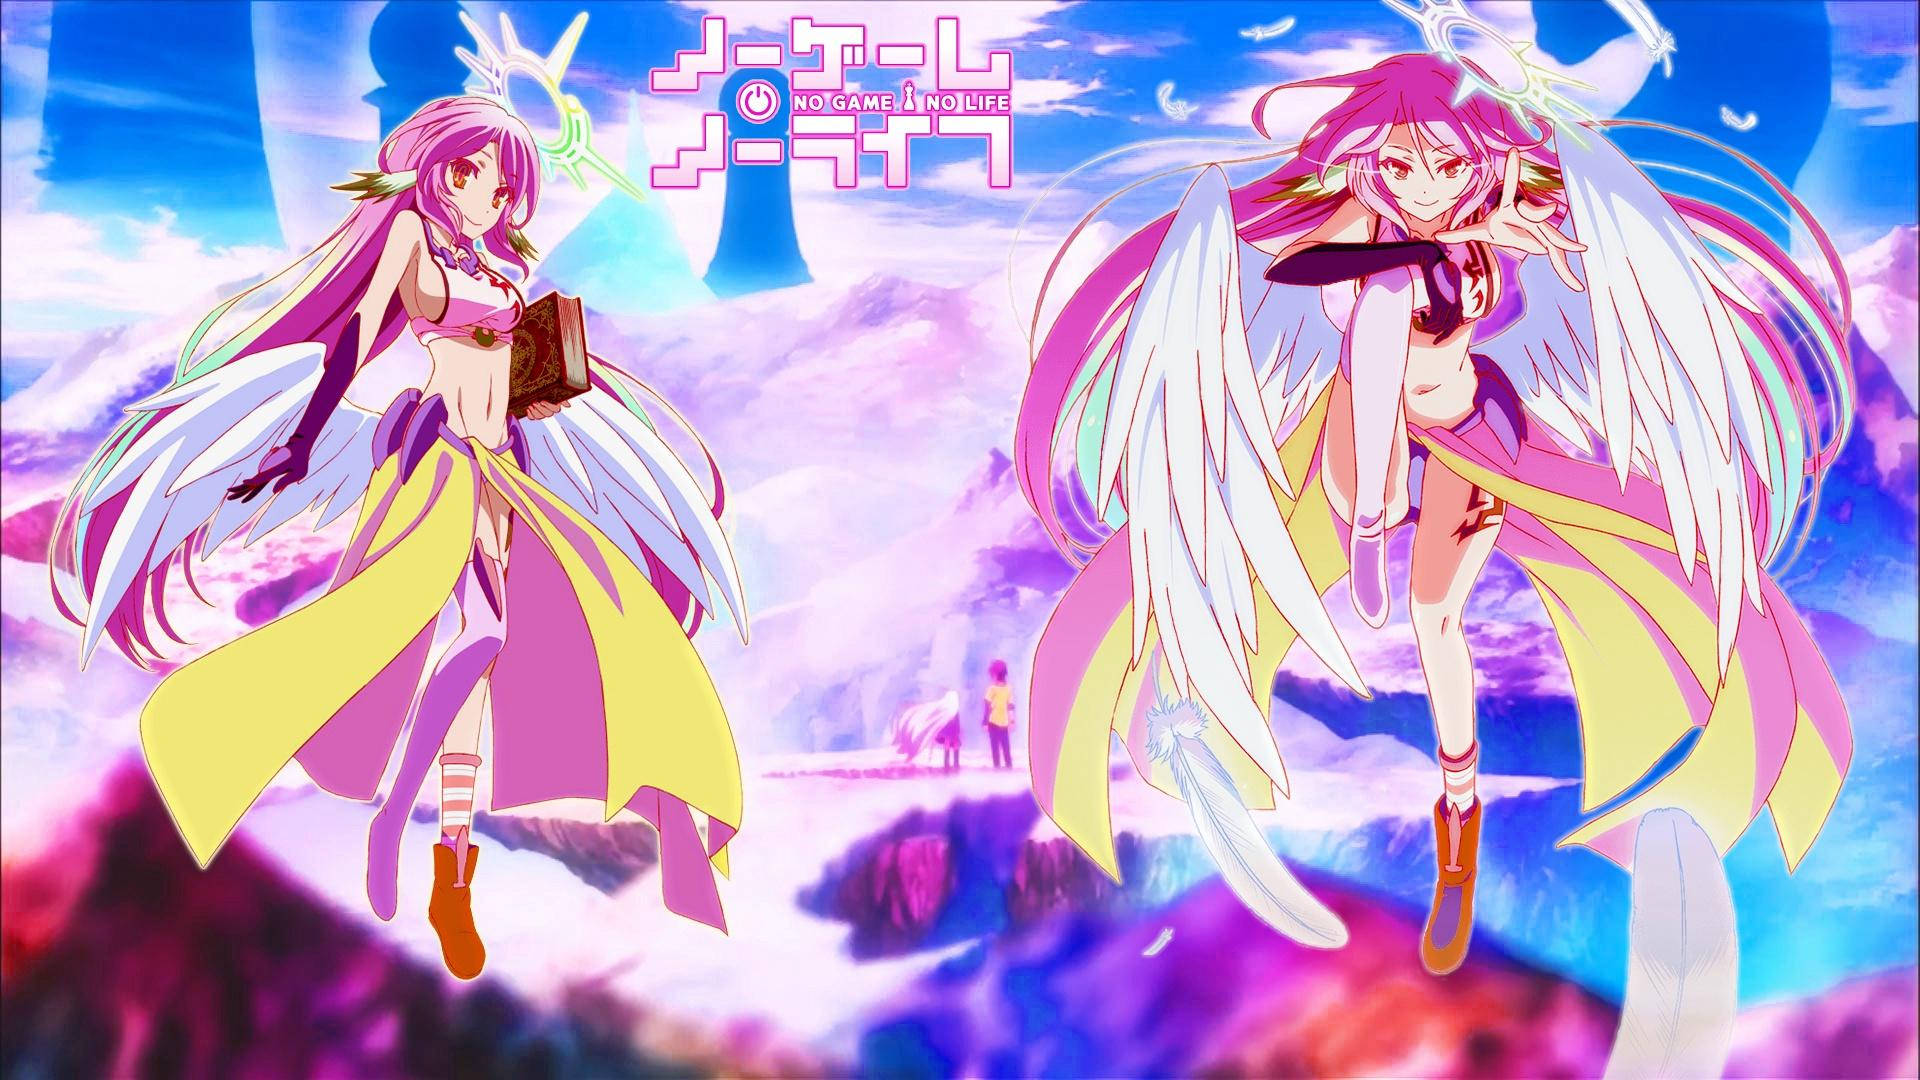 The Wise And All-knowing Jibril From No Game No Life Background